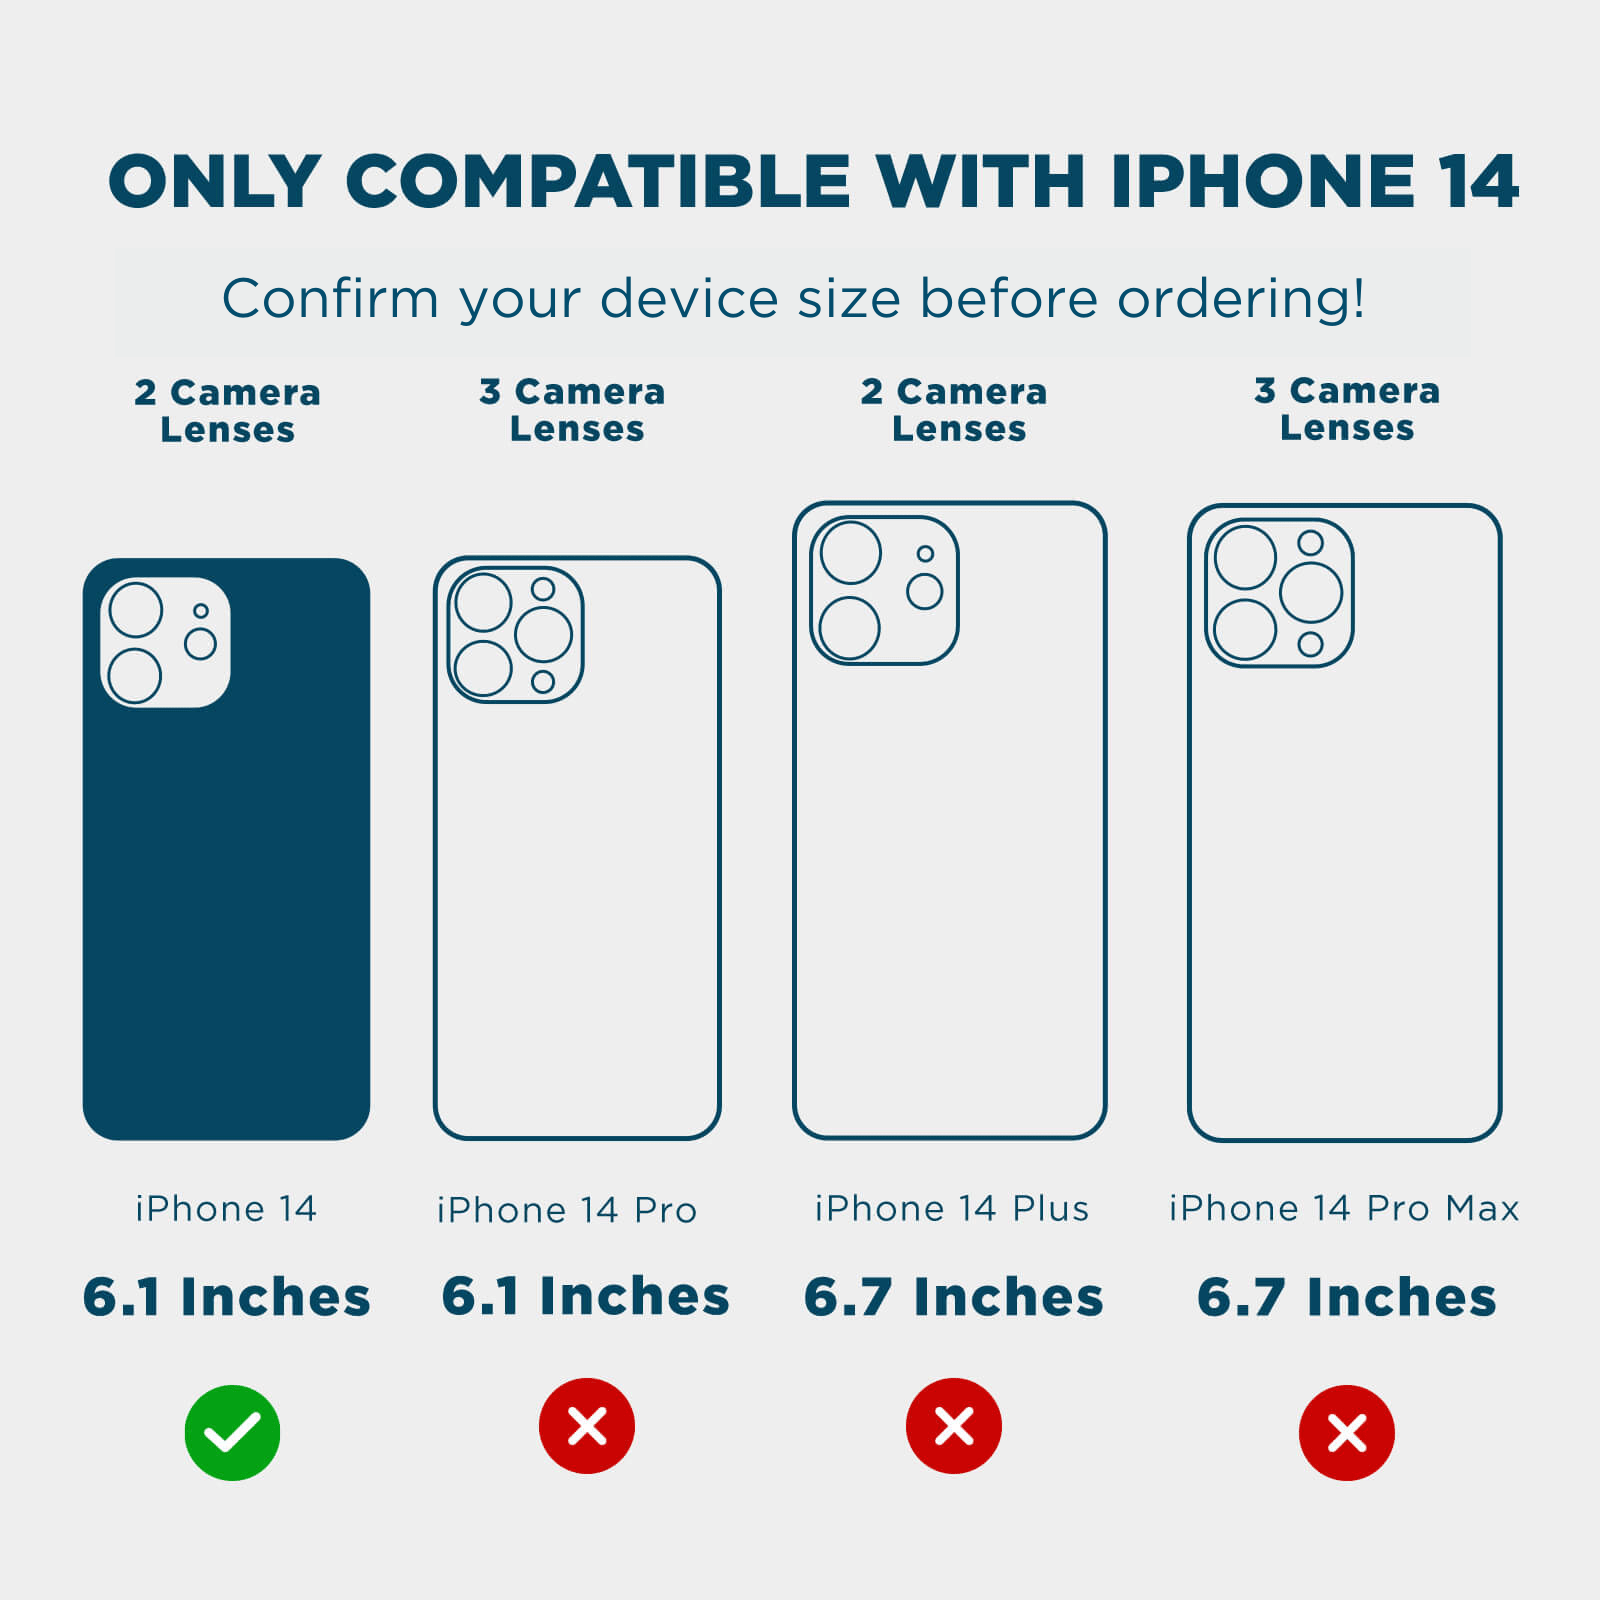 ONLY COMPATIBLE WITH IPHONE 14 CONFIRM YOUR DEVICE SIZE BEFORE ORDERING! 2 CAMERA LENSES, 3 CAMERA LENSES, 2 CAMERA LENSES, 3 CAMERA LENSES. IPHONE 14 6.1" IPHONE 14 PRO 6.1" IPHONE 14 PLUS 6.7" IPHONE 14 PRO MAX 6.7". COLOR::GOLD